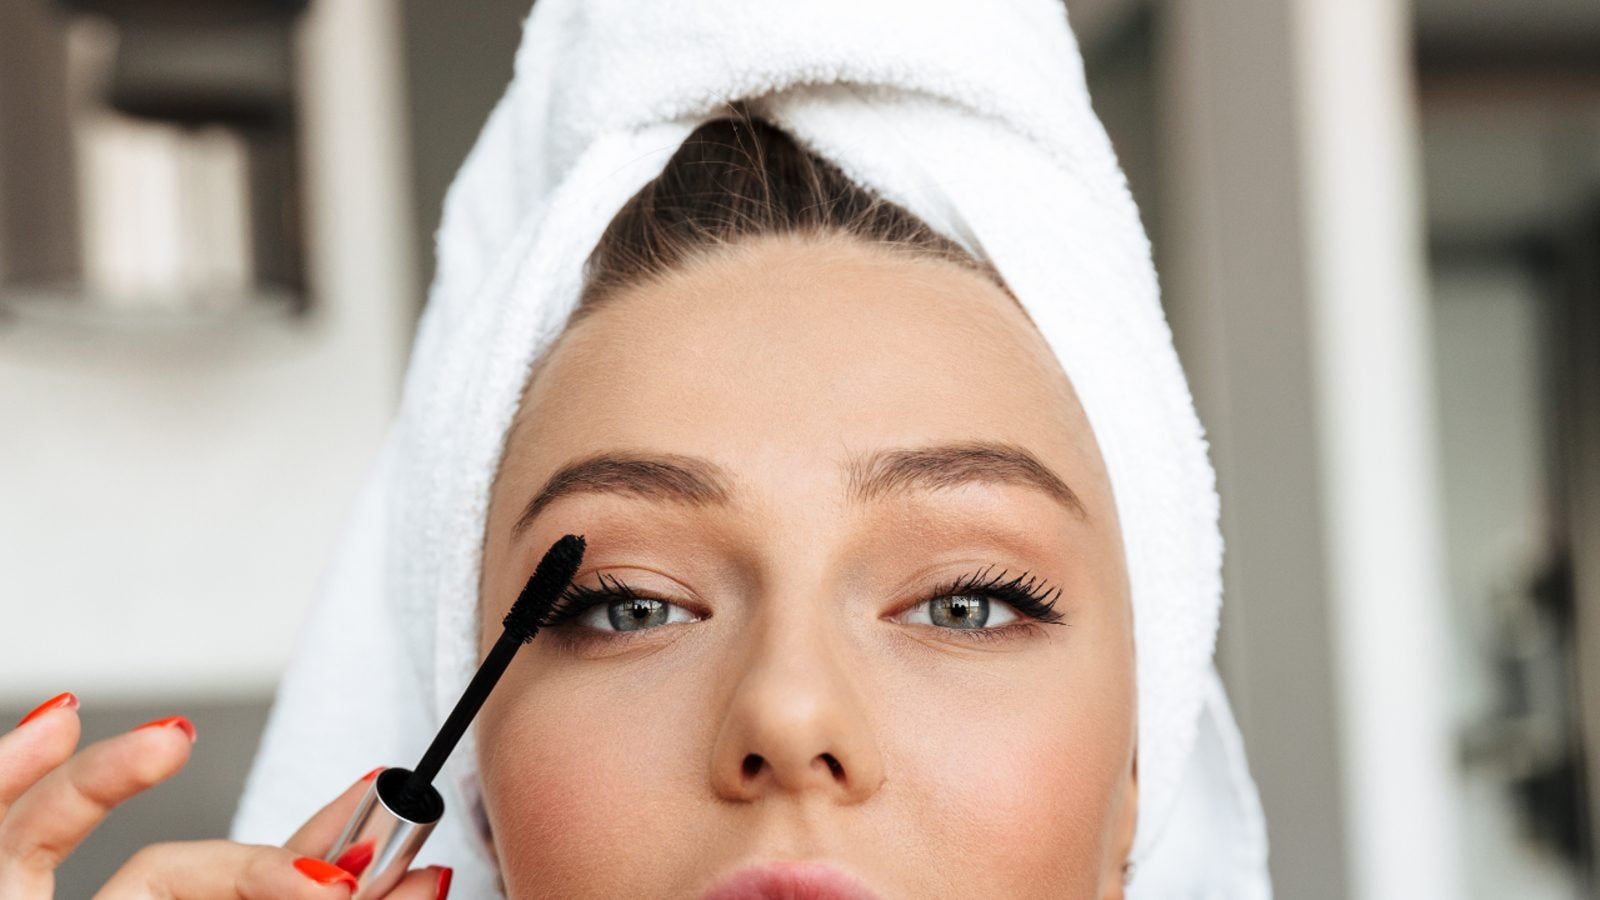 Makeup Tips to Instantly Make Your Hooded Eyes Look Bigger and Brighter